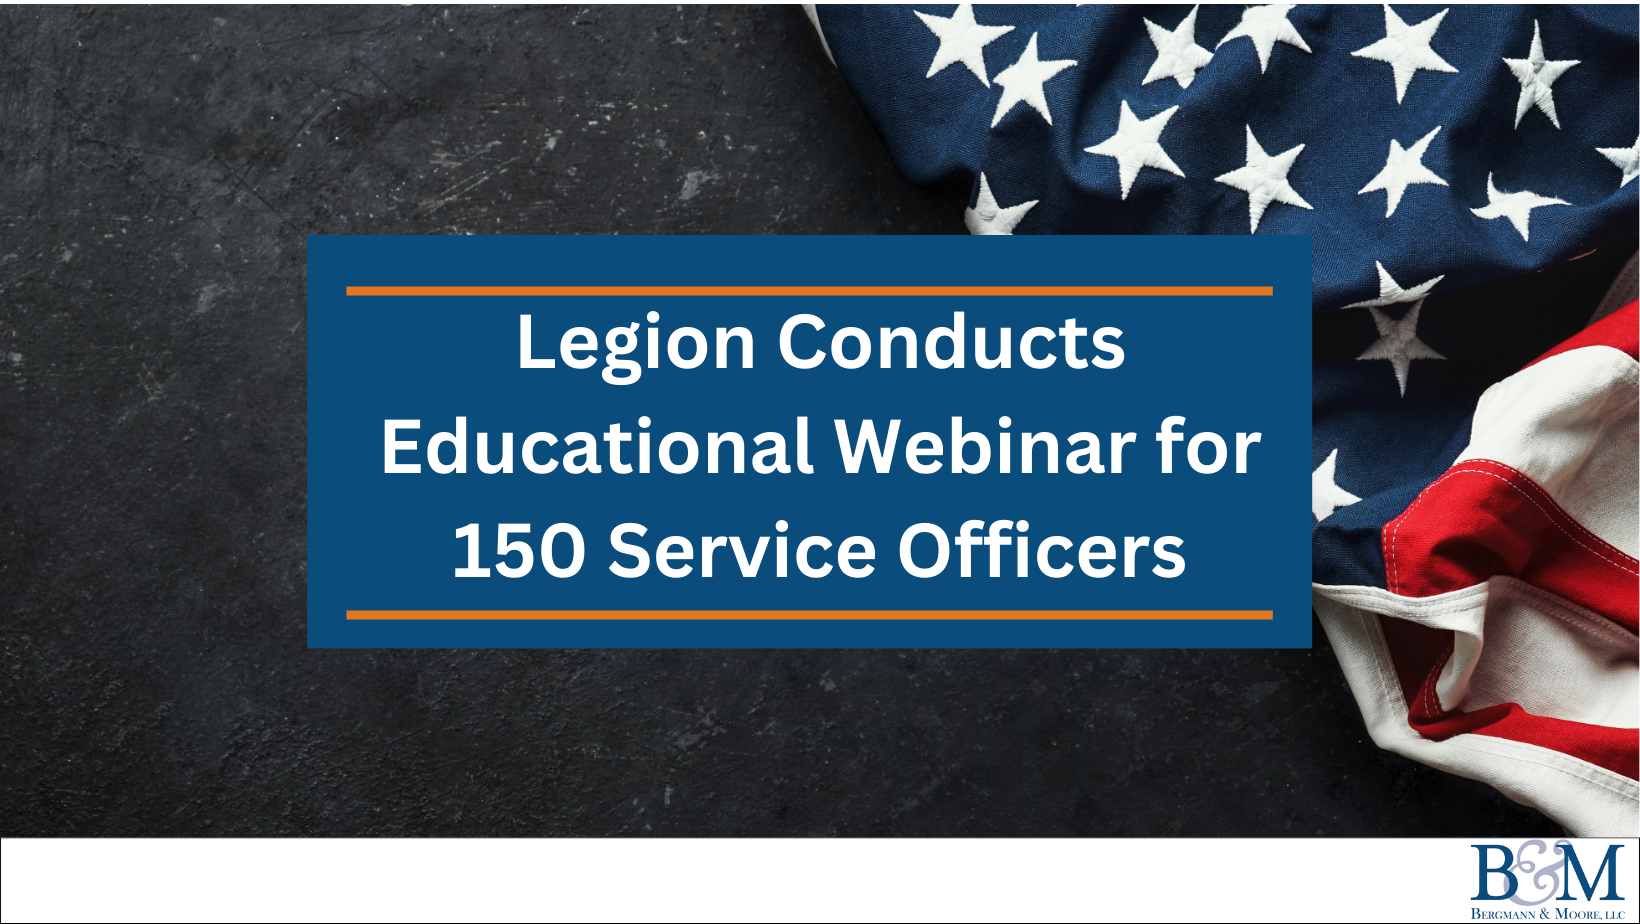 Legion conducts educational webinar for 150 service officers